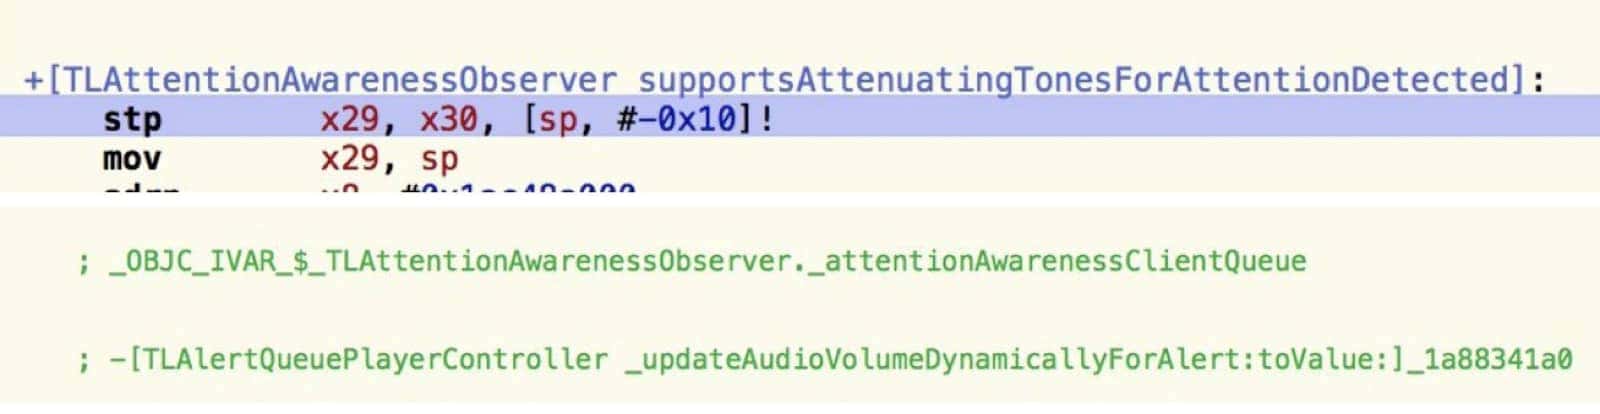 Code snippets for silencing notifications when you look at your iPhone. Eye-tracking ads could also use code like this.